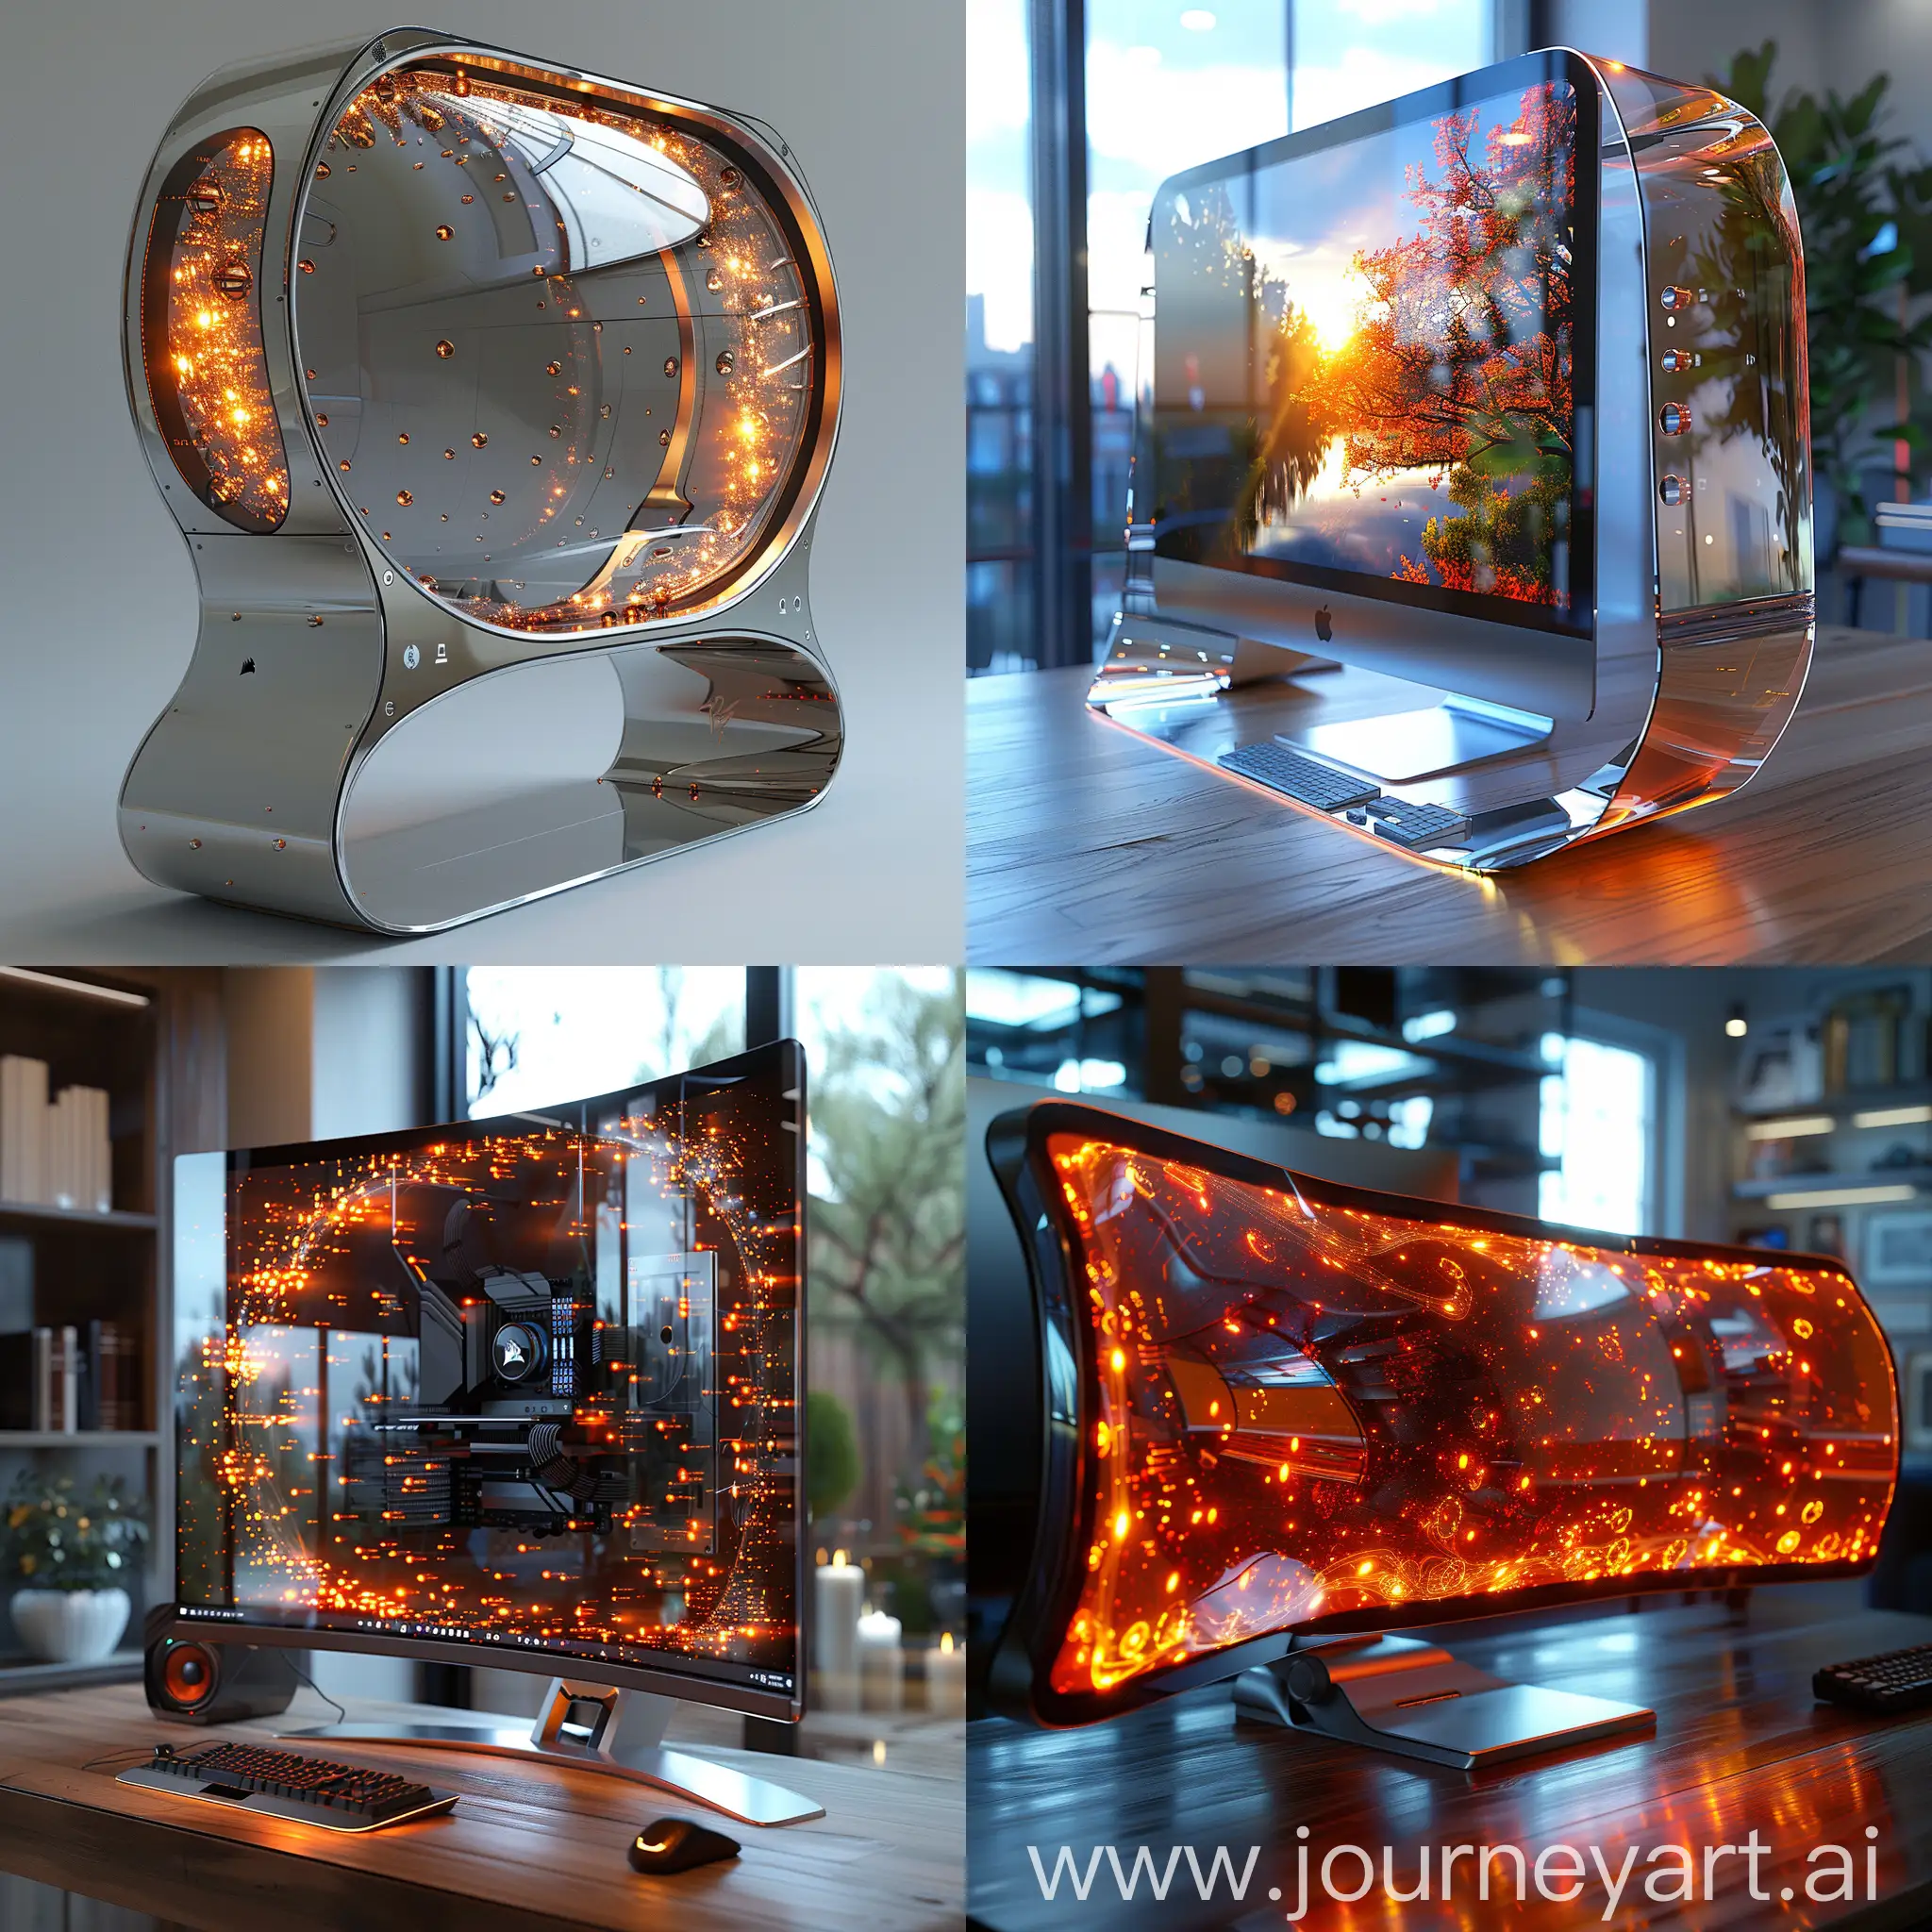 Futuristic-HighTech-Stainless-Steel-PC-Monitor-with-Smart-Materials